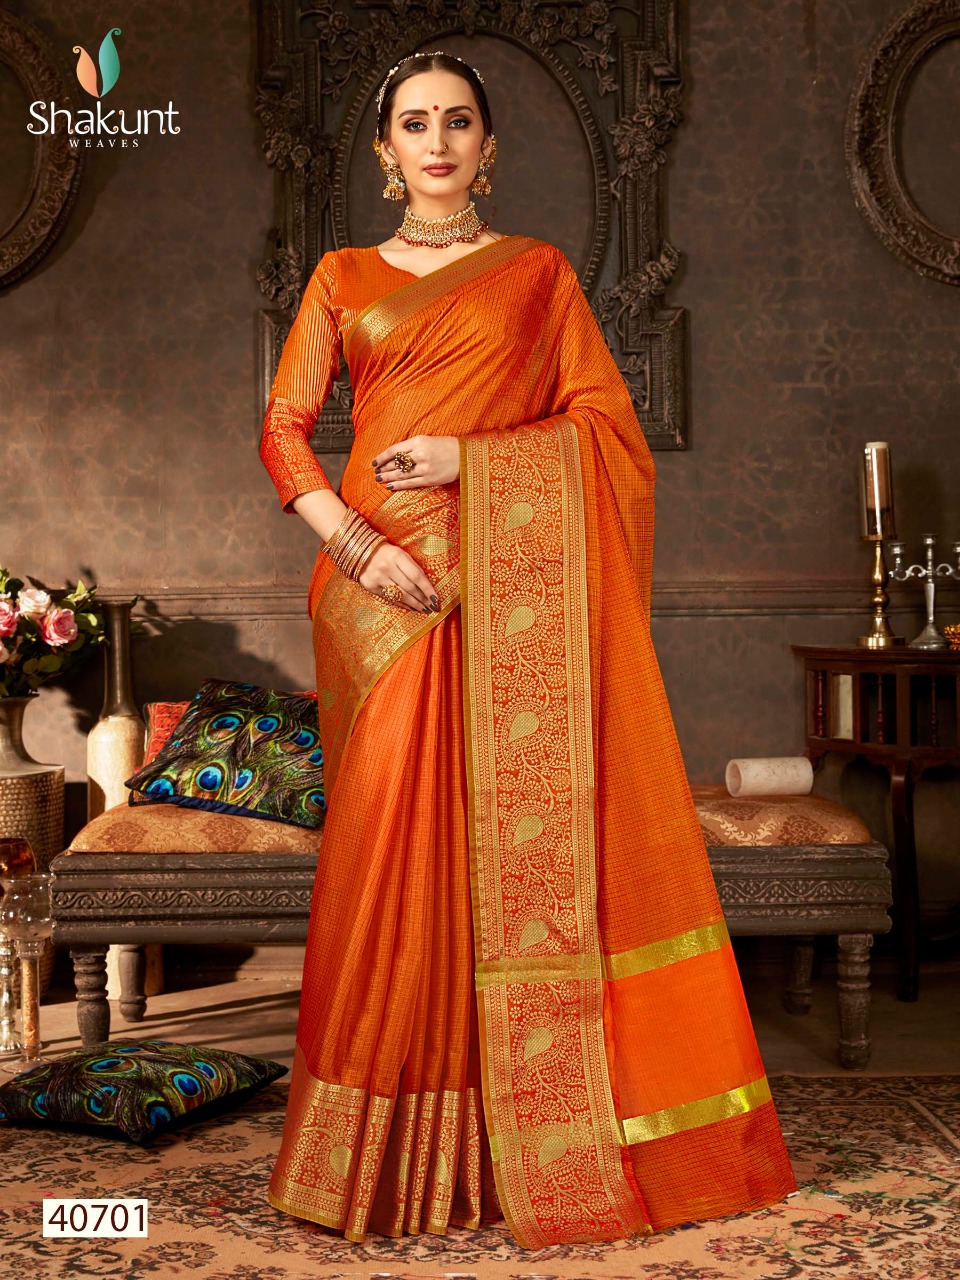 Shakunt weaves sumangal 3 Traditional sarees collection